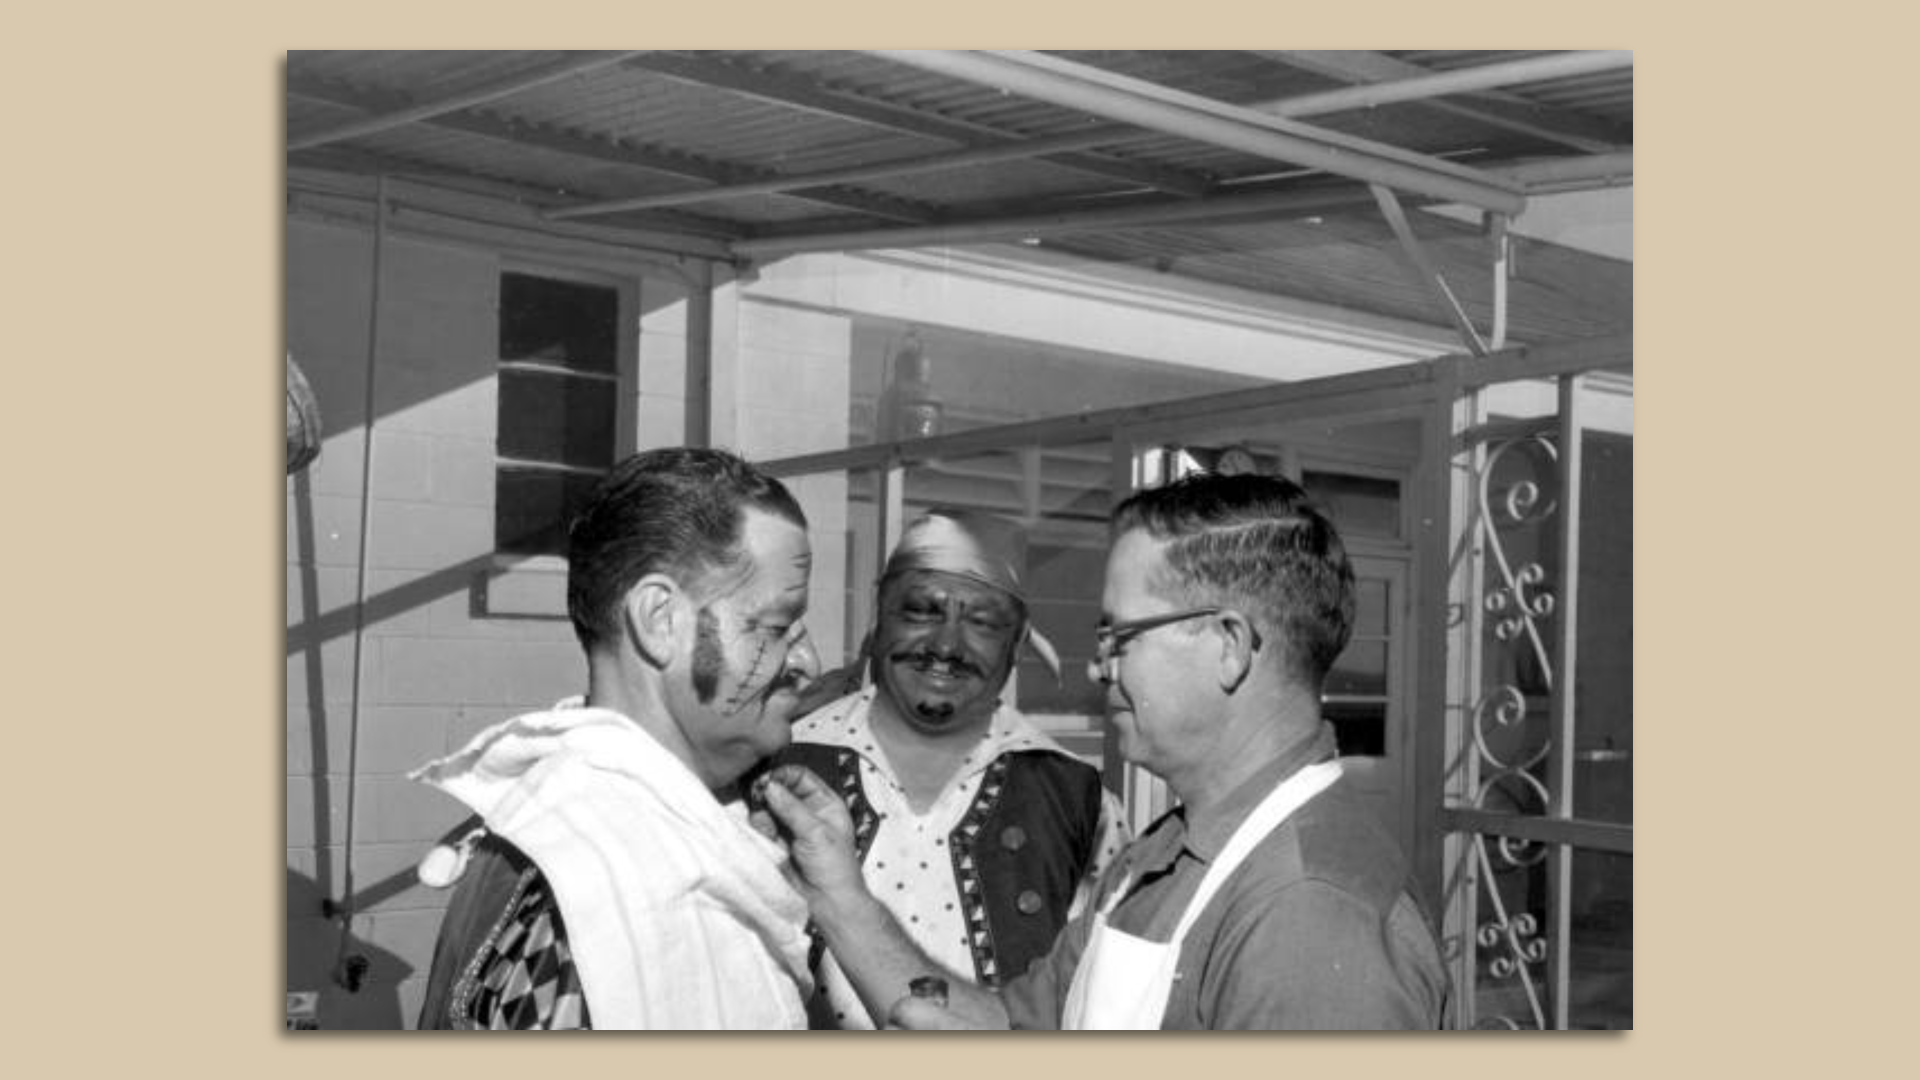 A man applies another man's pirate makeup while a third man watches on, smiling.